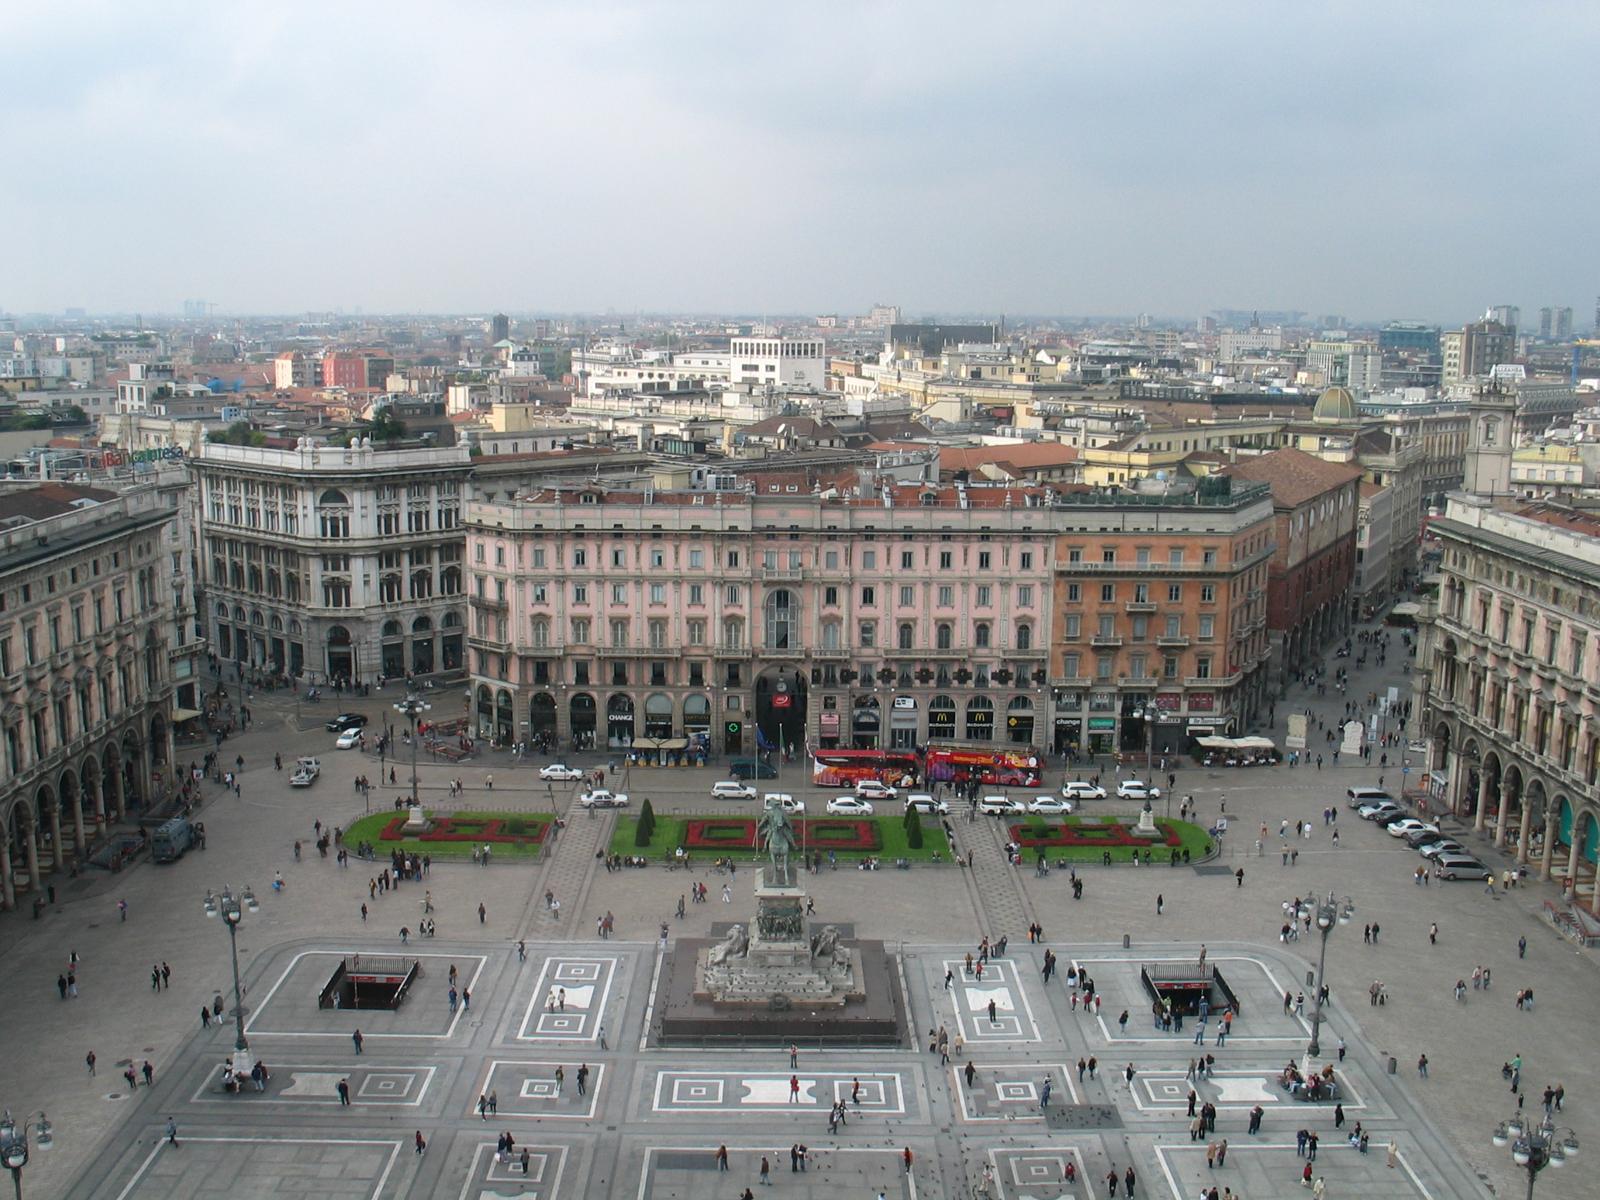 Piazza Fontana from the top of the Duomo